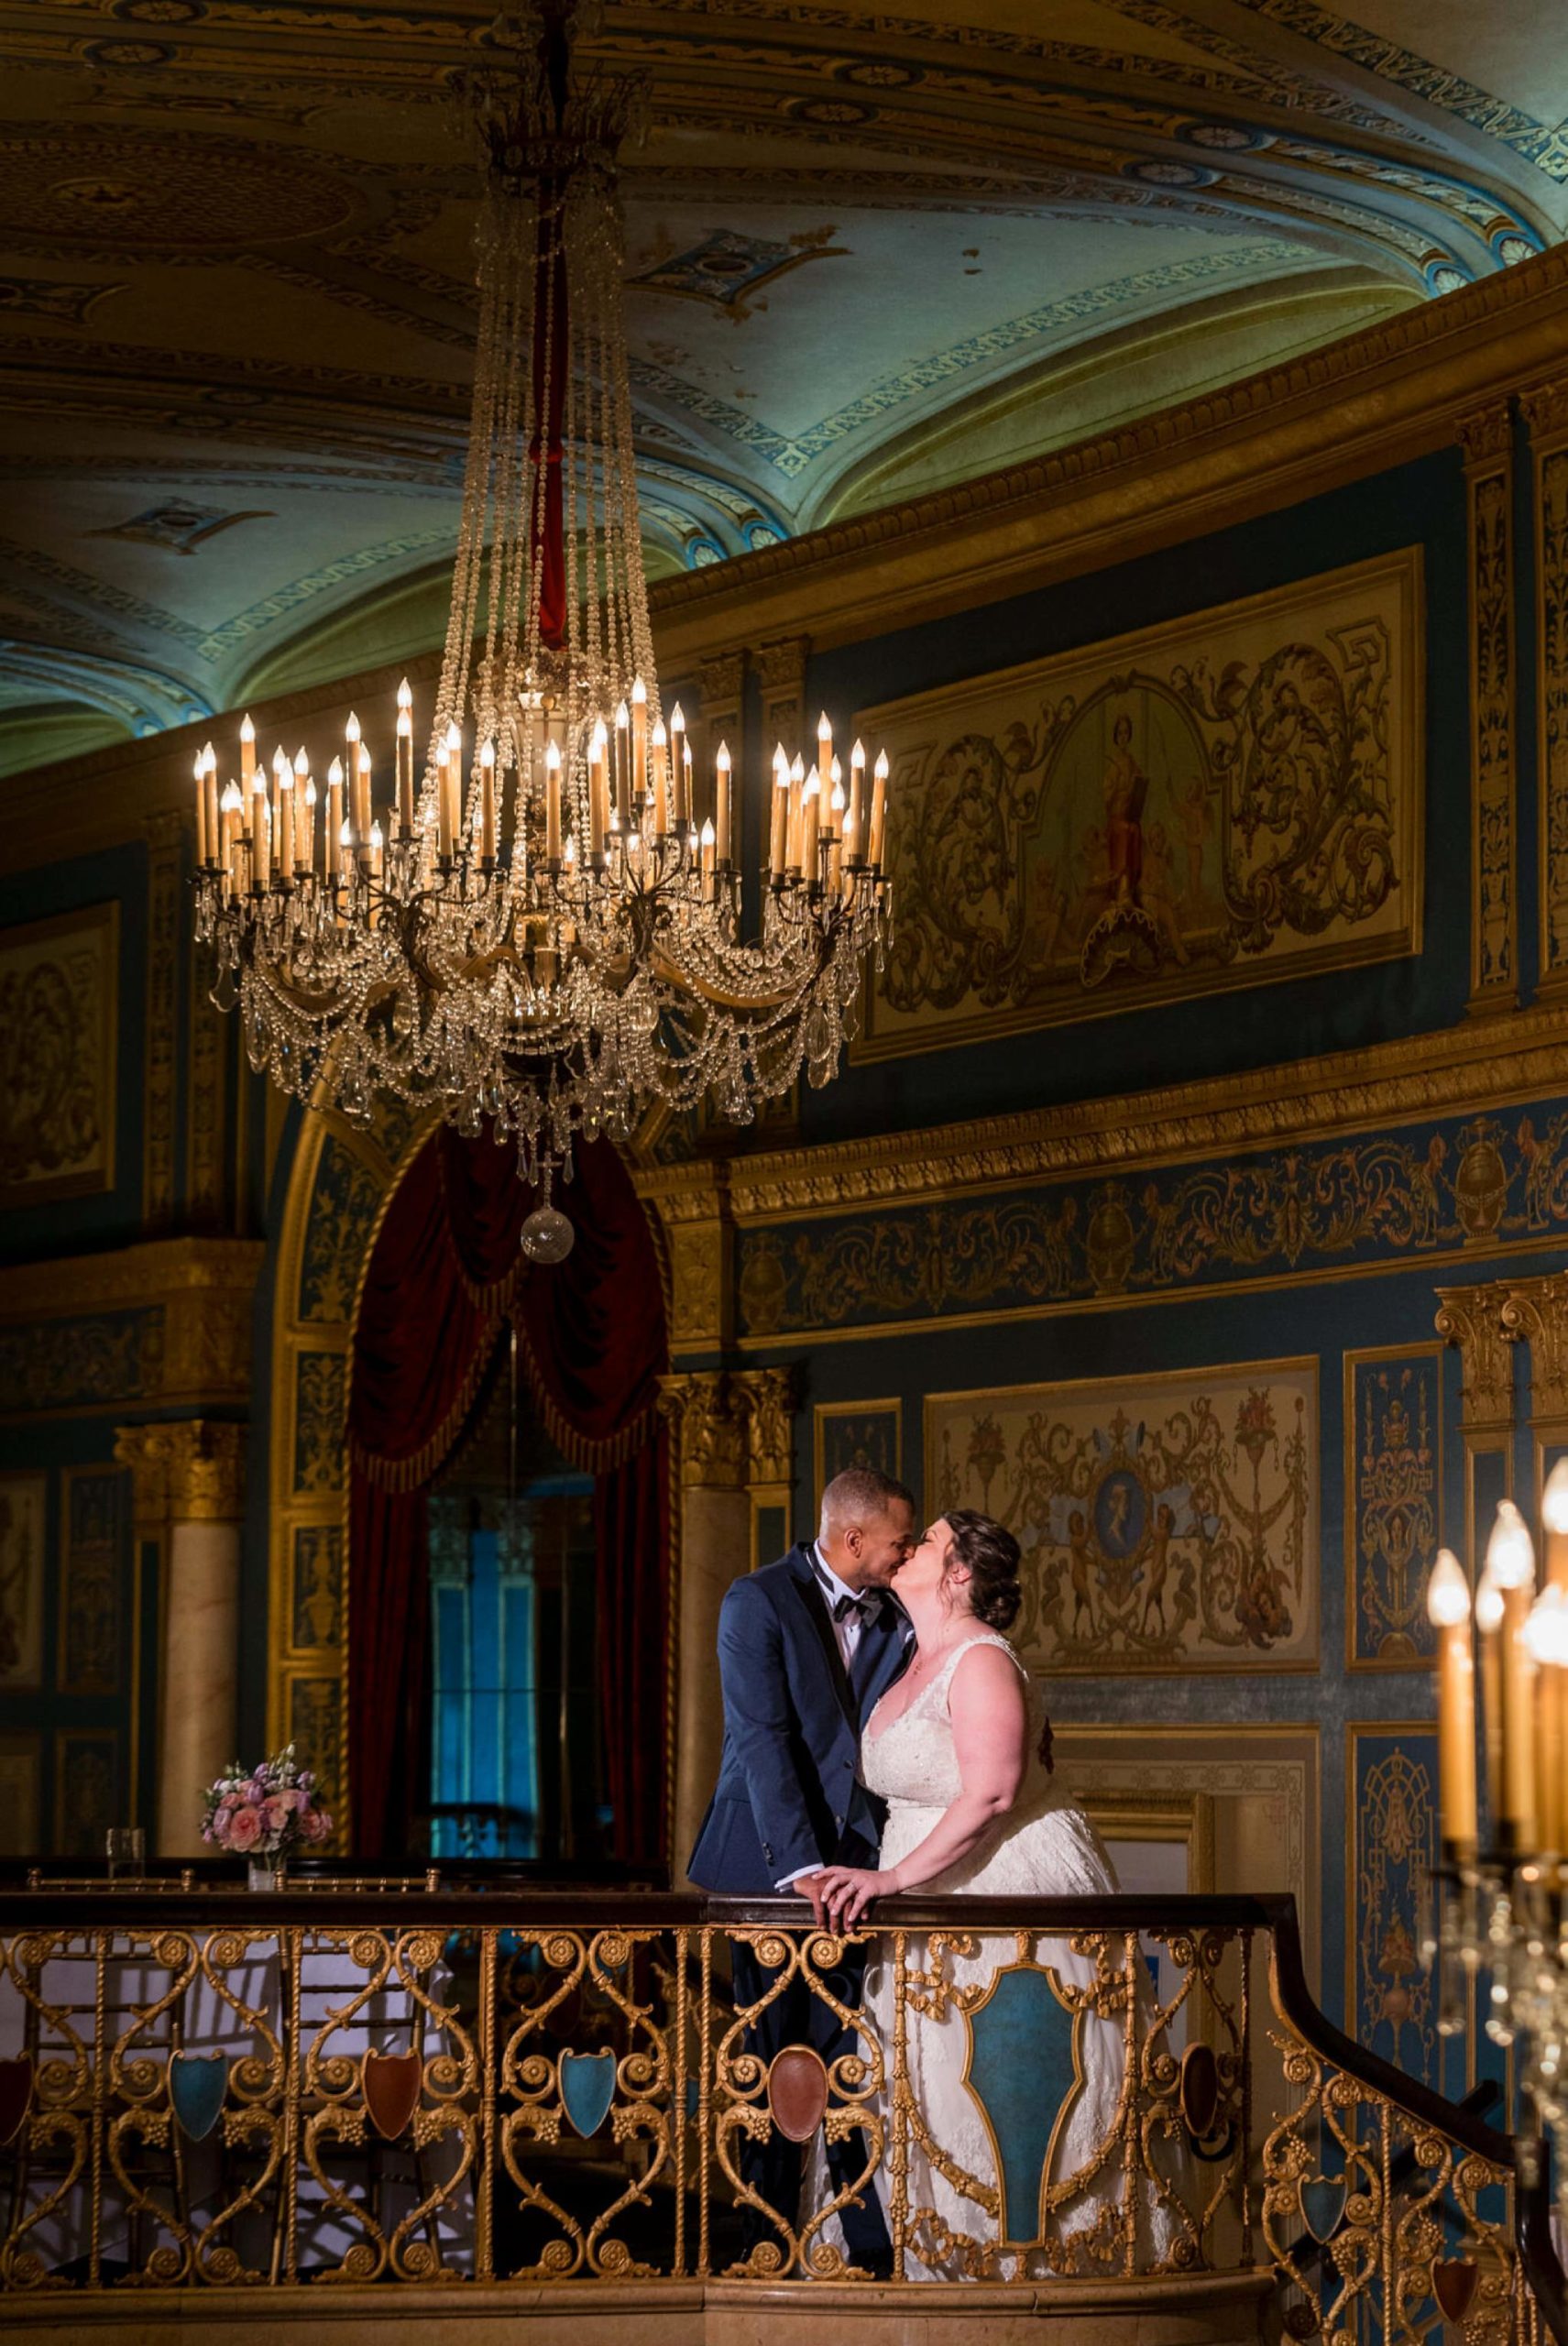 a bride and groom kiss holding an ornate railing with chandeliers in the foreground and background at the Detroit Opera House